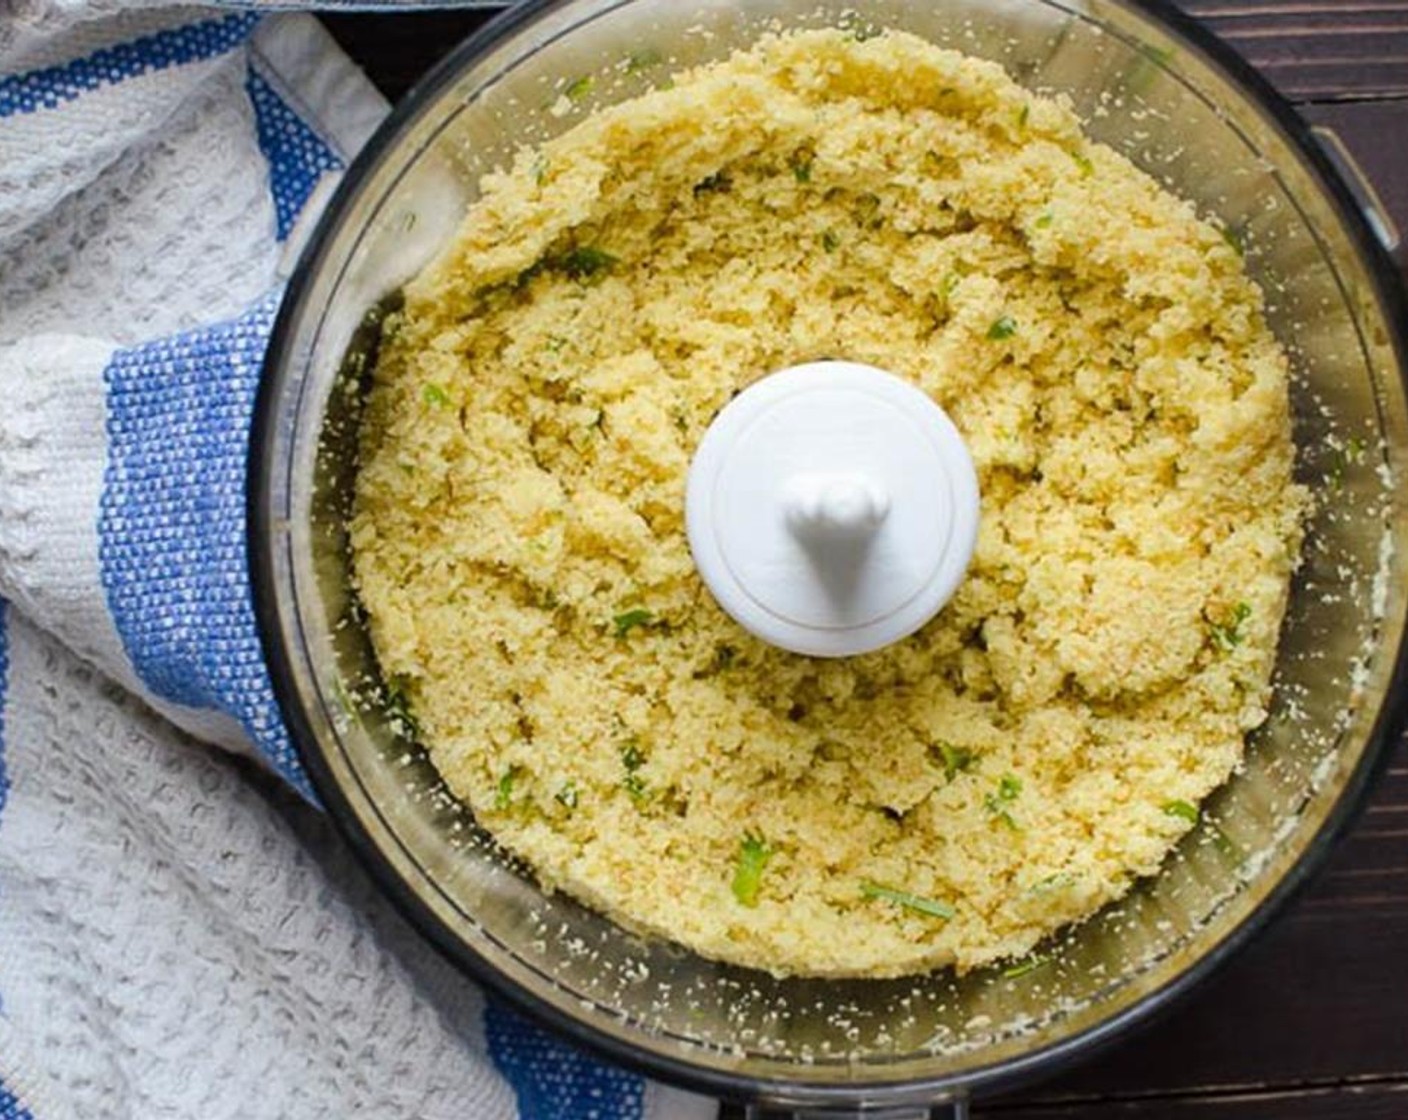 step 2 In a food processor, add the Bread (1 slice), Unsalted Butter (3 Tbsp) and Fresh Parsley (1 Tbsp) and pulse until crumbly. Spray an 8" casserole dish with Vegetable Oil Cooking Spray (as needed) and set aside. Preheat the oven to 350 degrees F (180 degrees C).